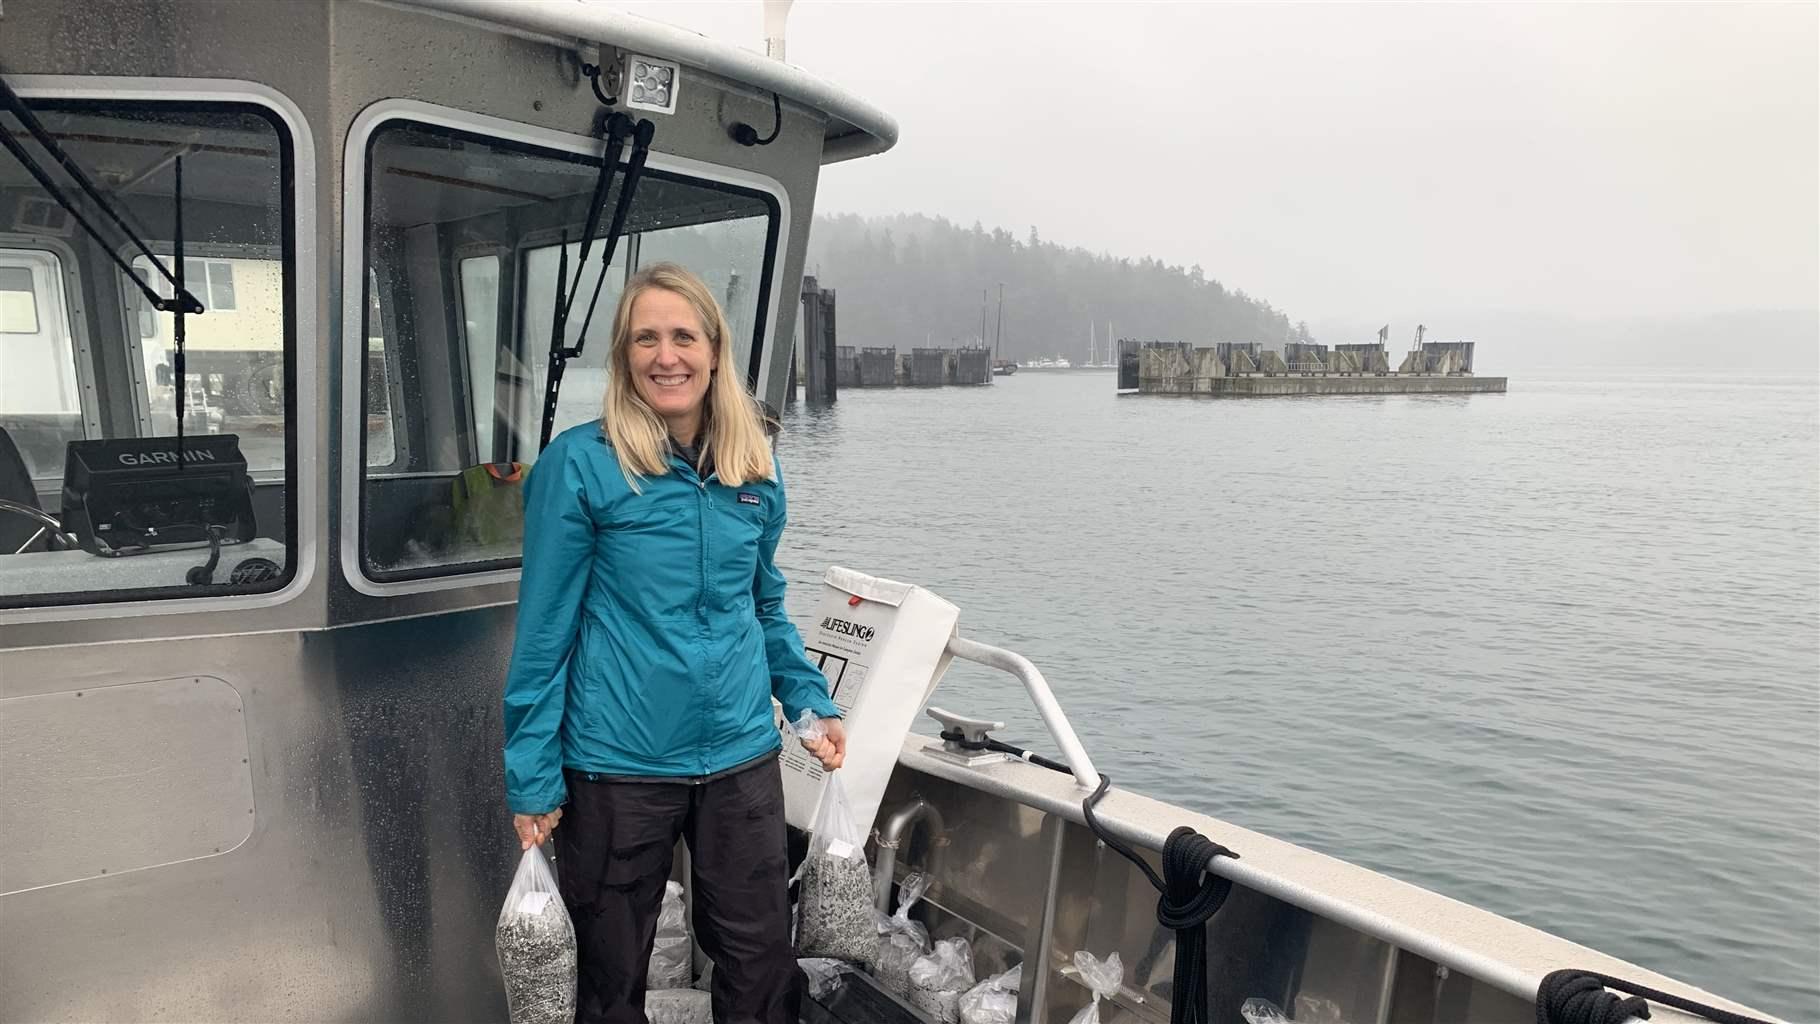 Tina Whitman, science director at Friends of the San Juans, works to protect nearshore marine habitats—including eelgrass meadows—that are important to marine wildlife and coastal communities.  